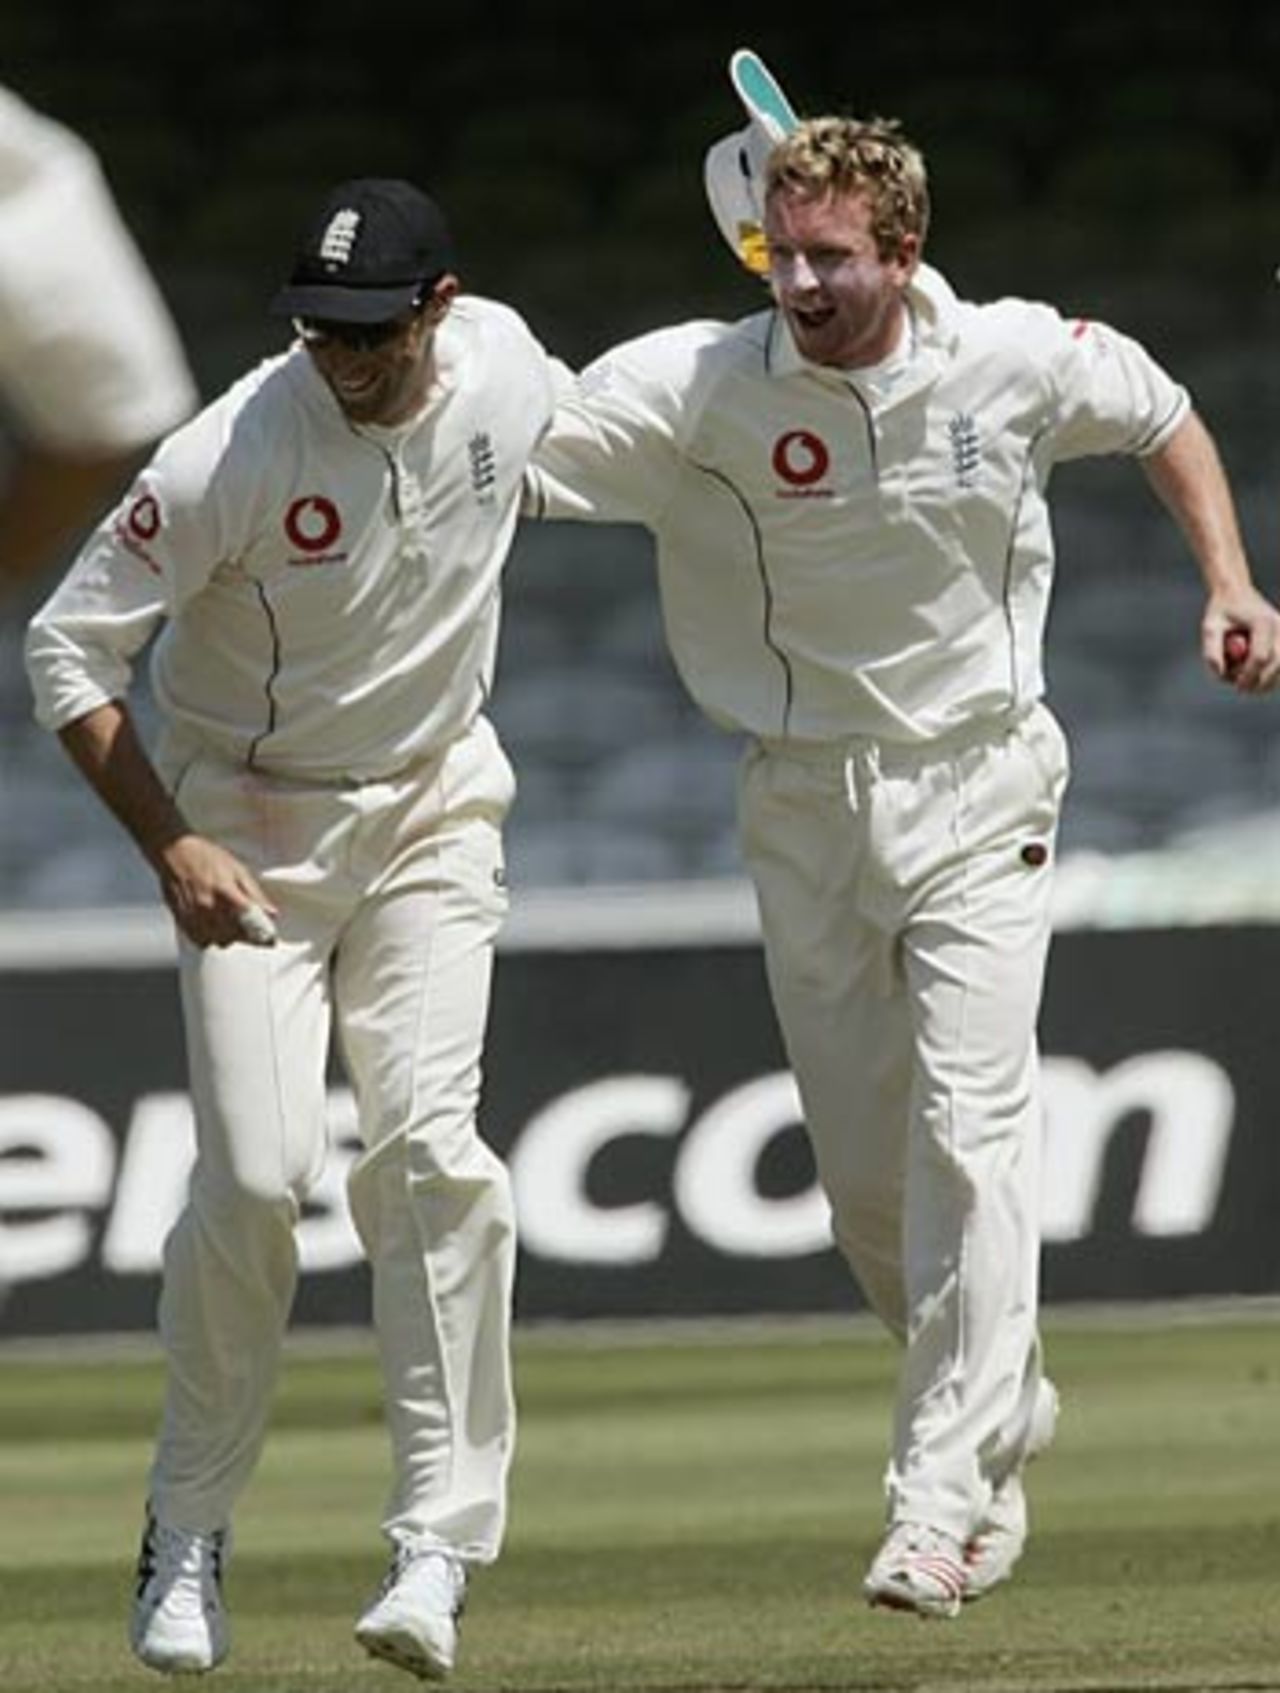 Paul Collingwood holds Imran Farhat at third slip as England strike early, England v Pakistan, 1st Test, Lord's, July 17, 2006